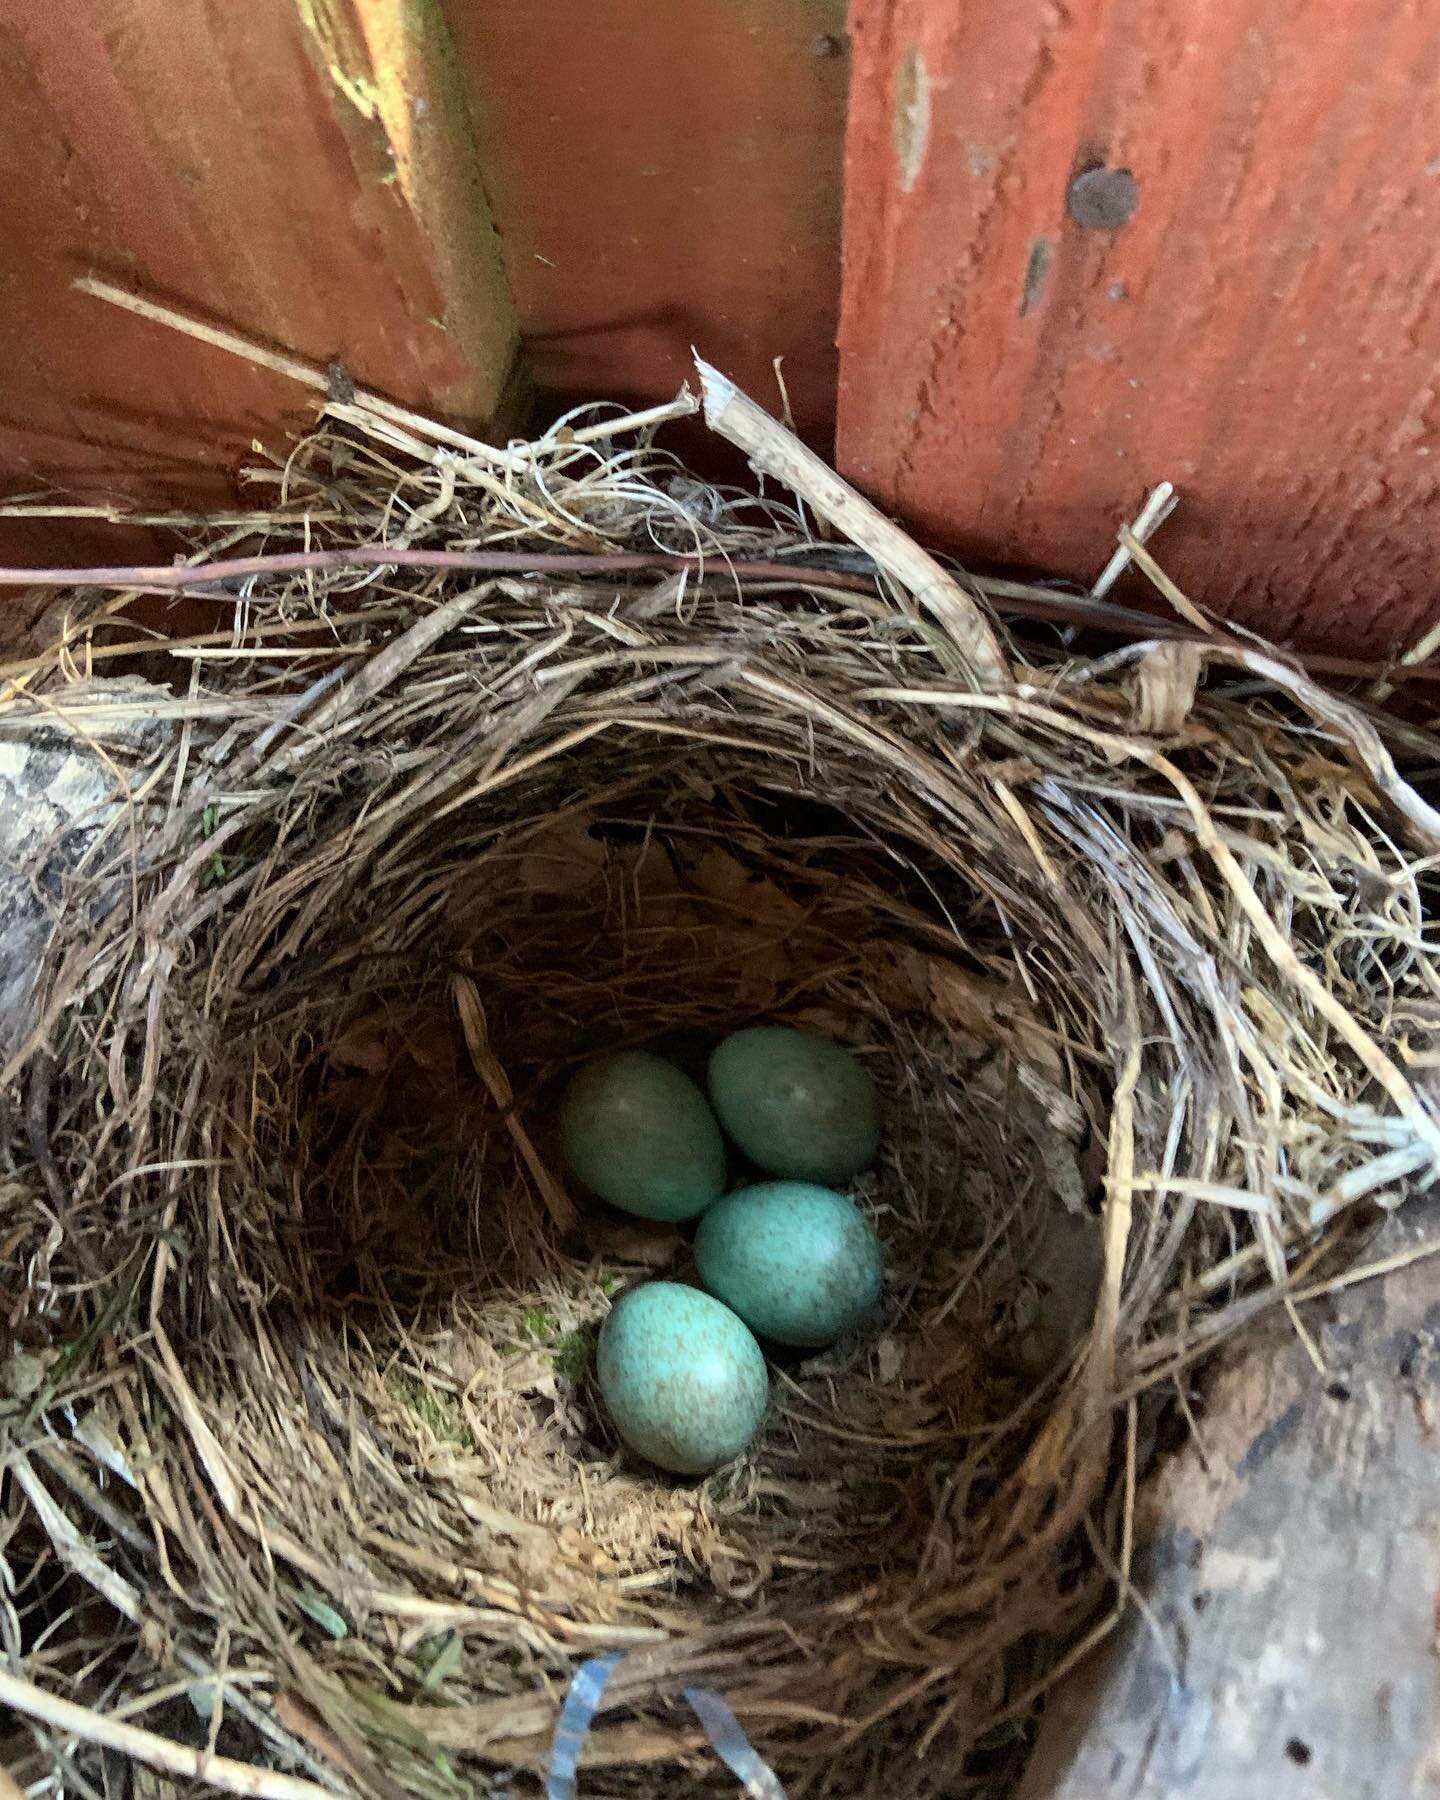 We found some new guests in our log store - so we&rsquo;re asking our visitors to take extra care around the new arrivals 🪺(mama blackbird was close by keeping an eye on things).
.
.
.
#curlewcabin #belhavenbay #dunbar #spring #visitscotland #eastlo